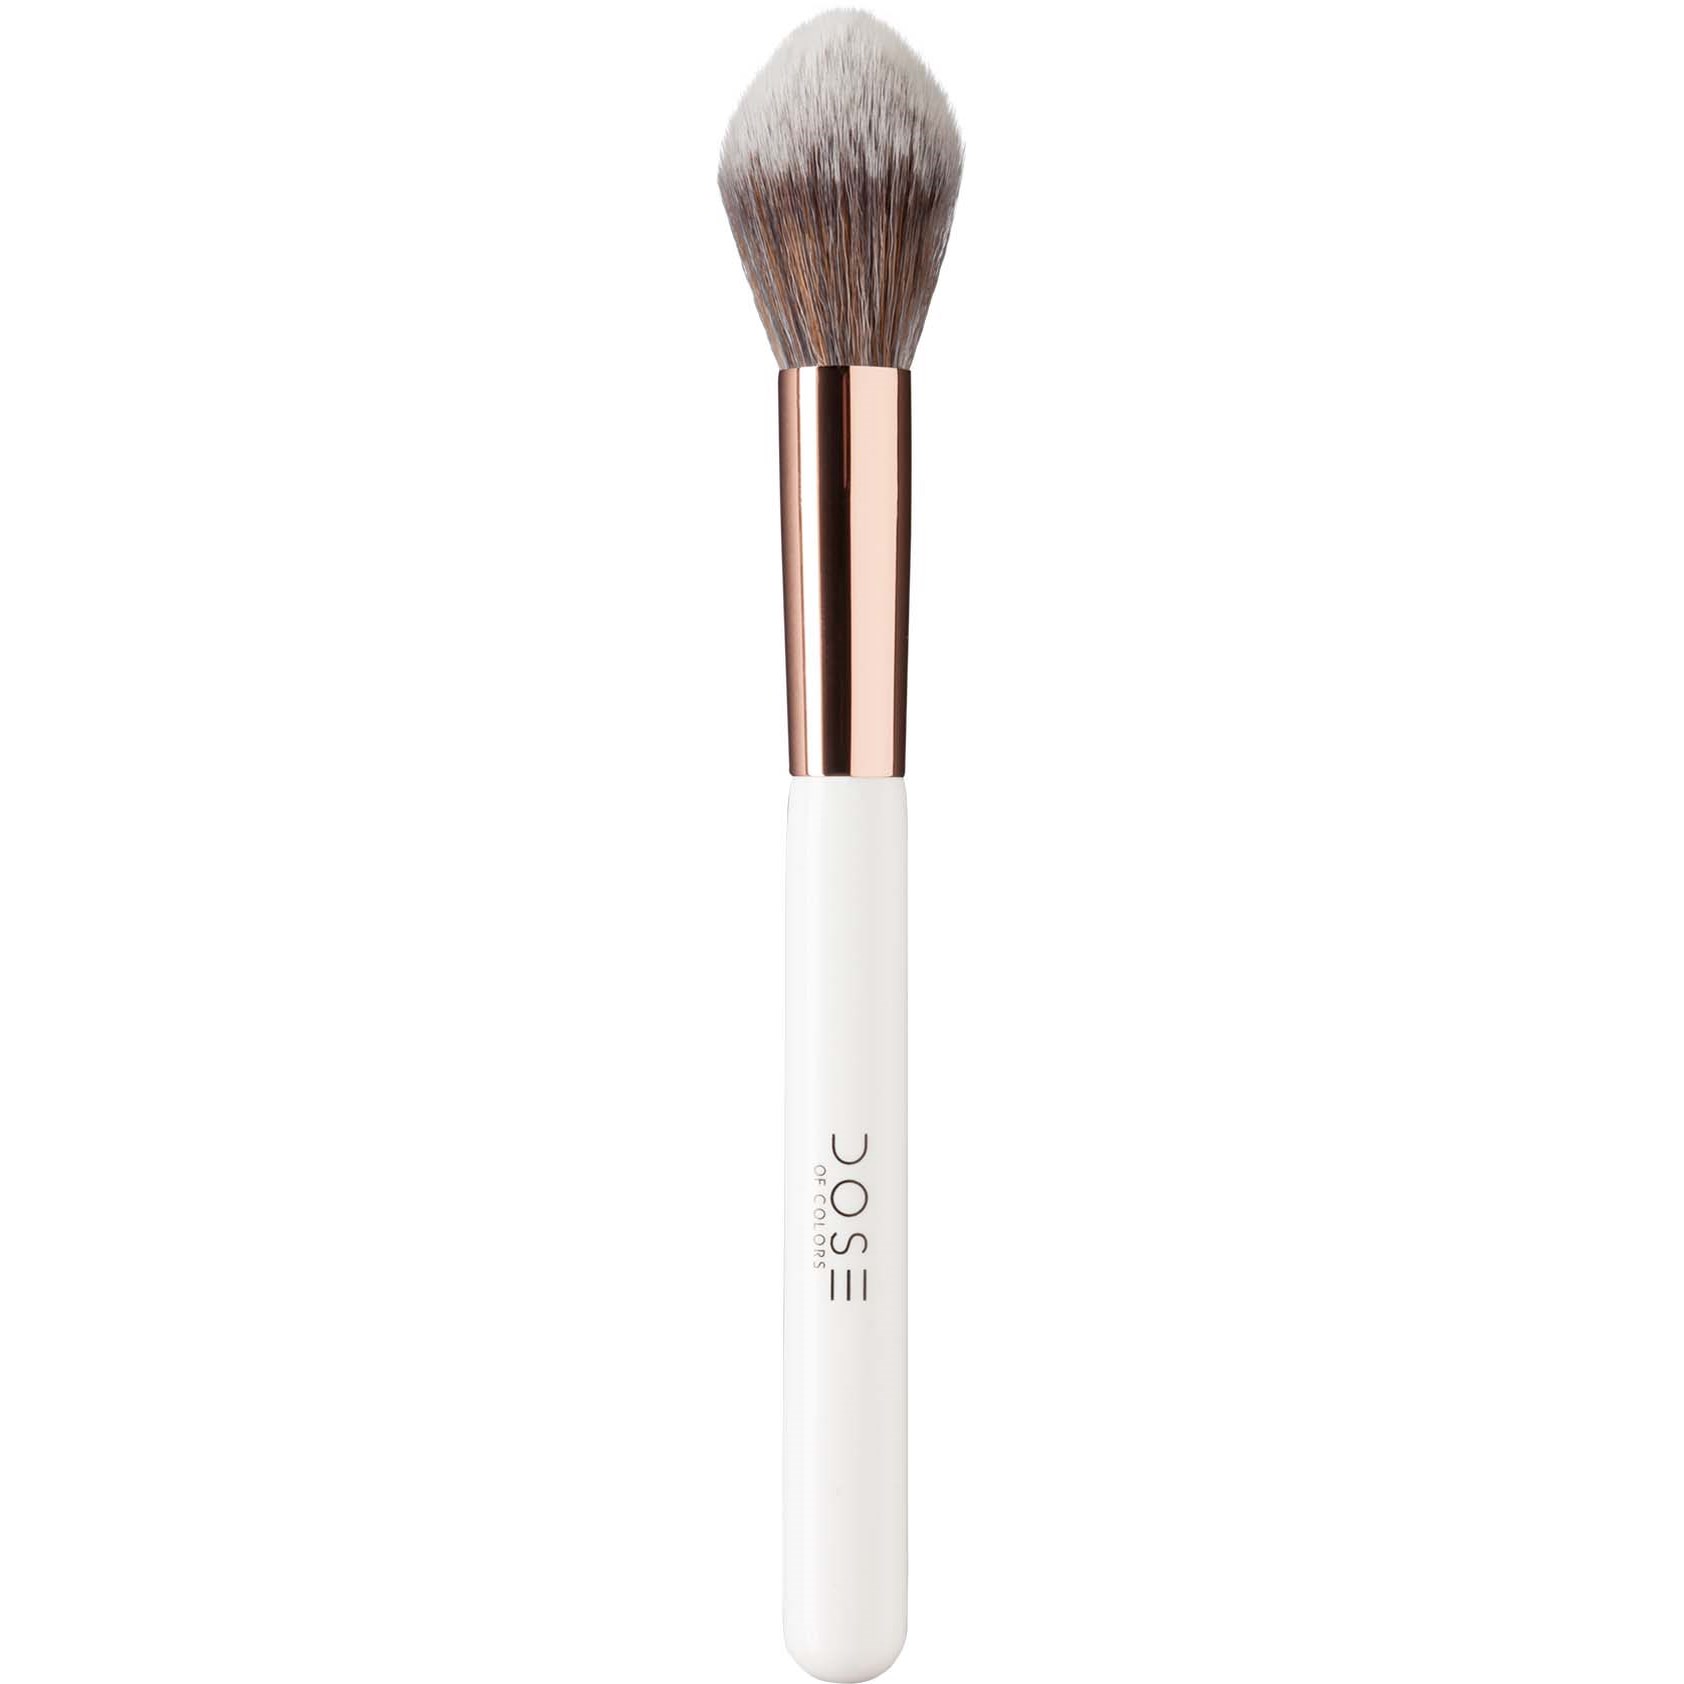 Dose of Colors Tapered Blush Brush